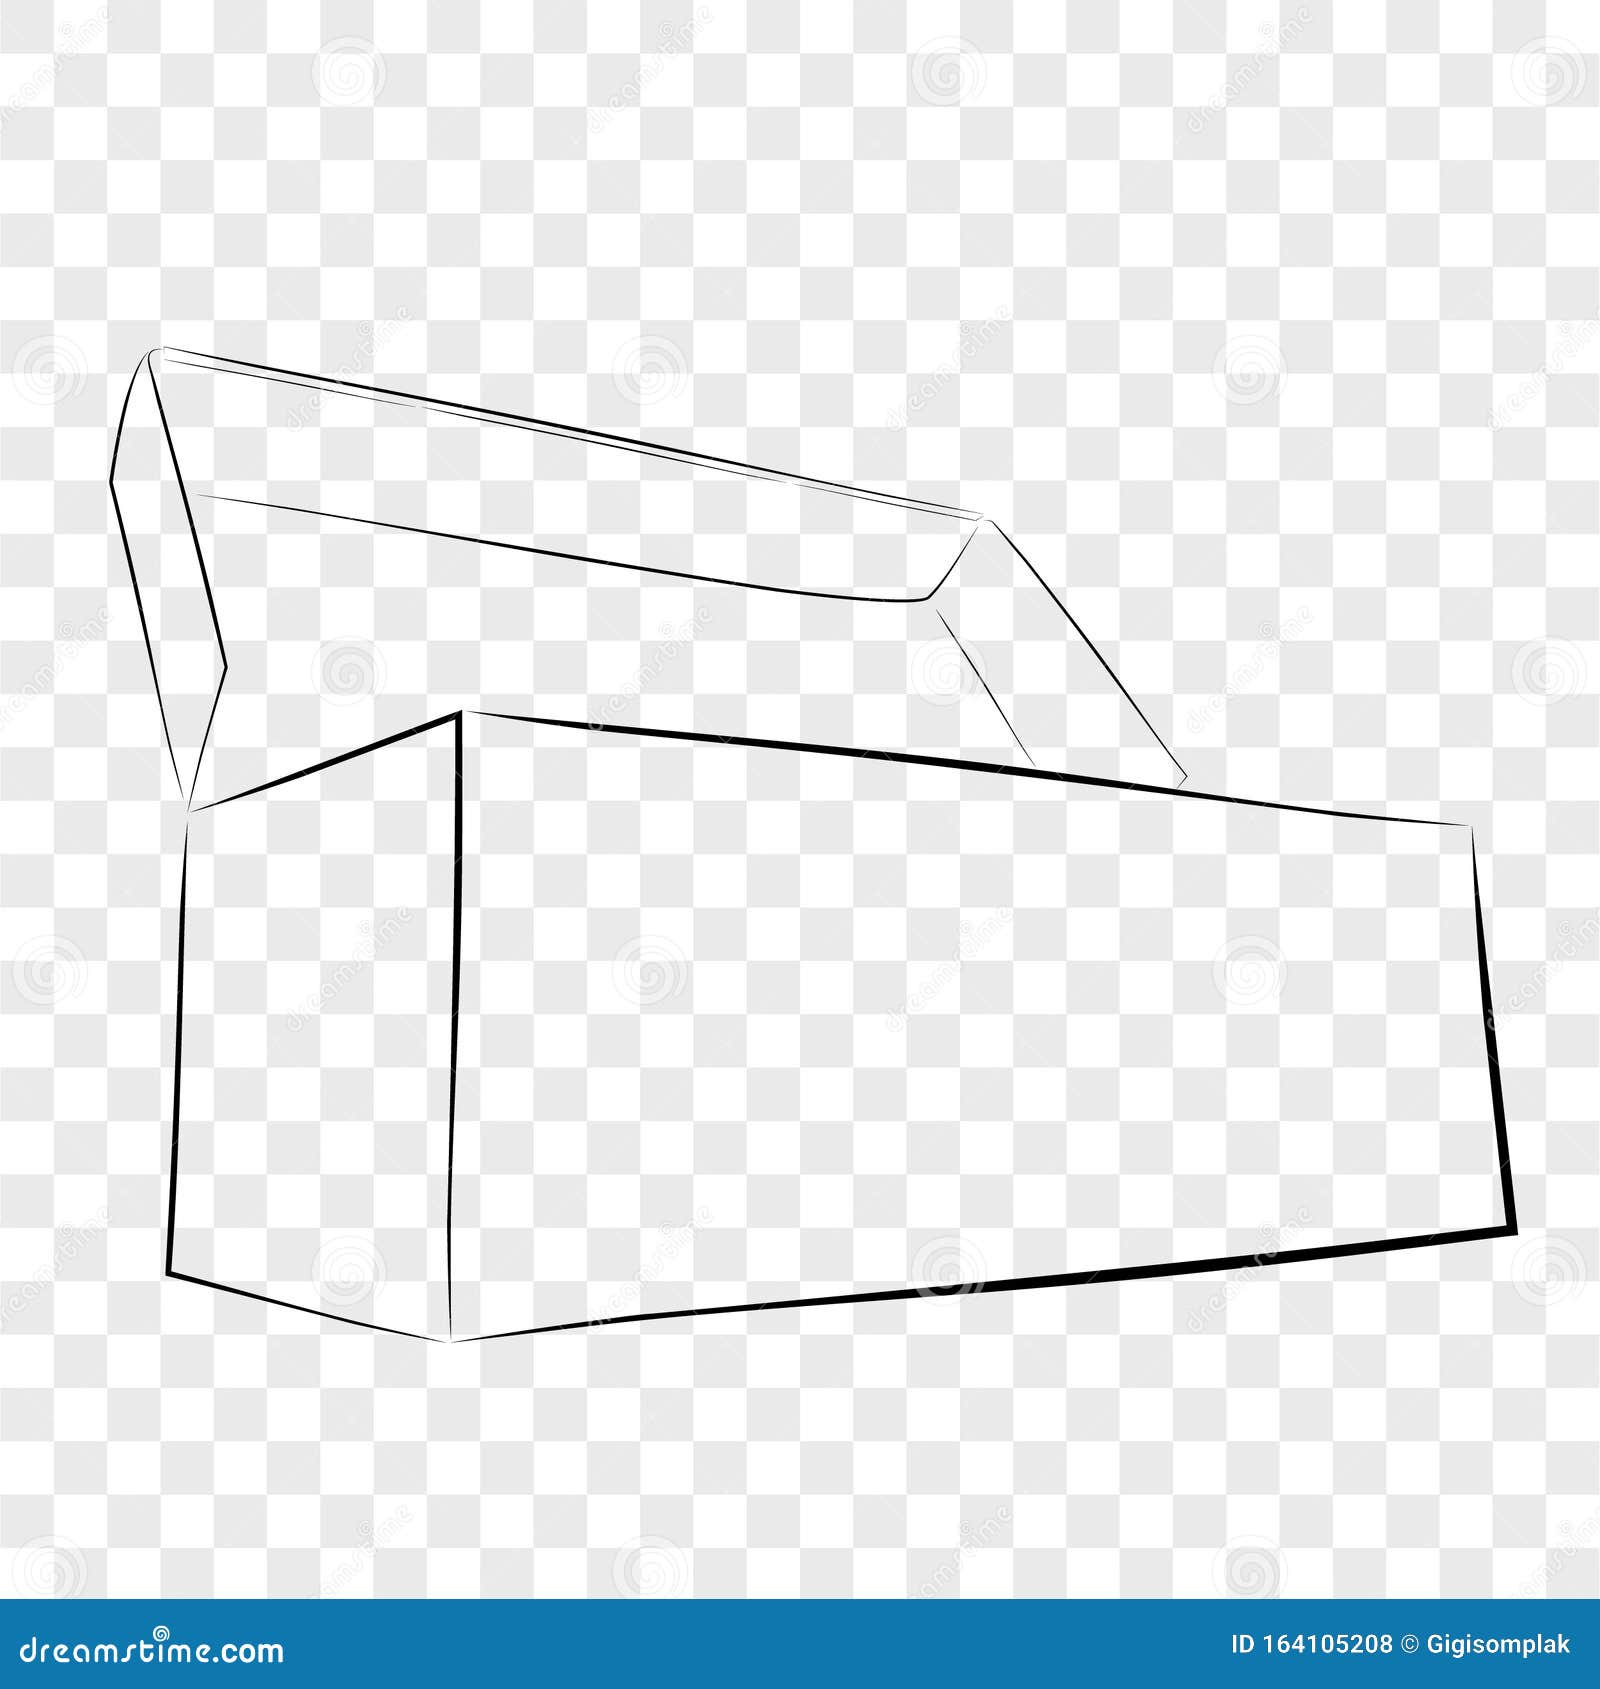 Simple Hand Draw Sketch Template Vector Black Shoe Box, At